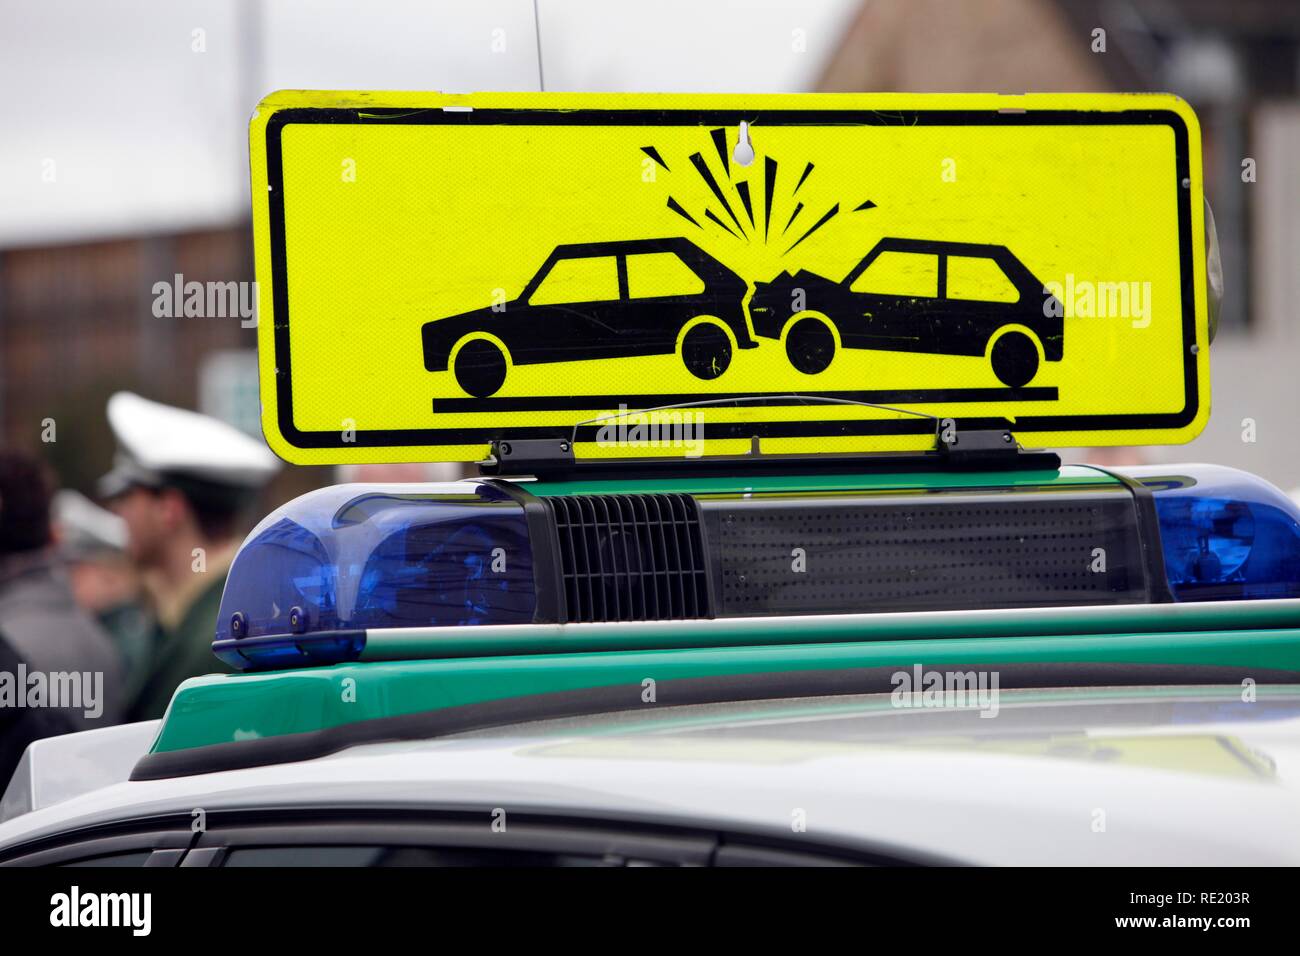 Warning sign on a police patrol car, drawing attention to a traffic accident, Duesseldorf, North Rhine-Westphalia Stock Photo